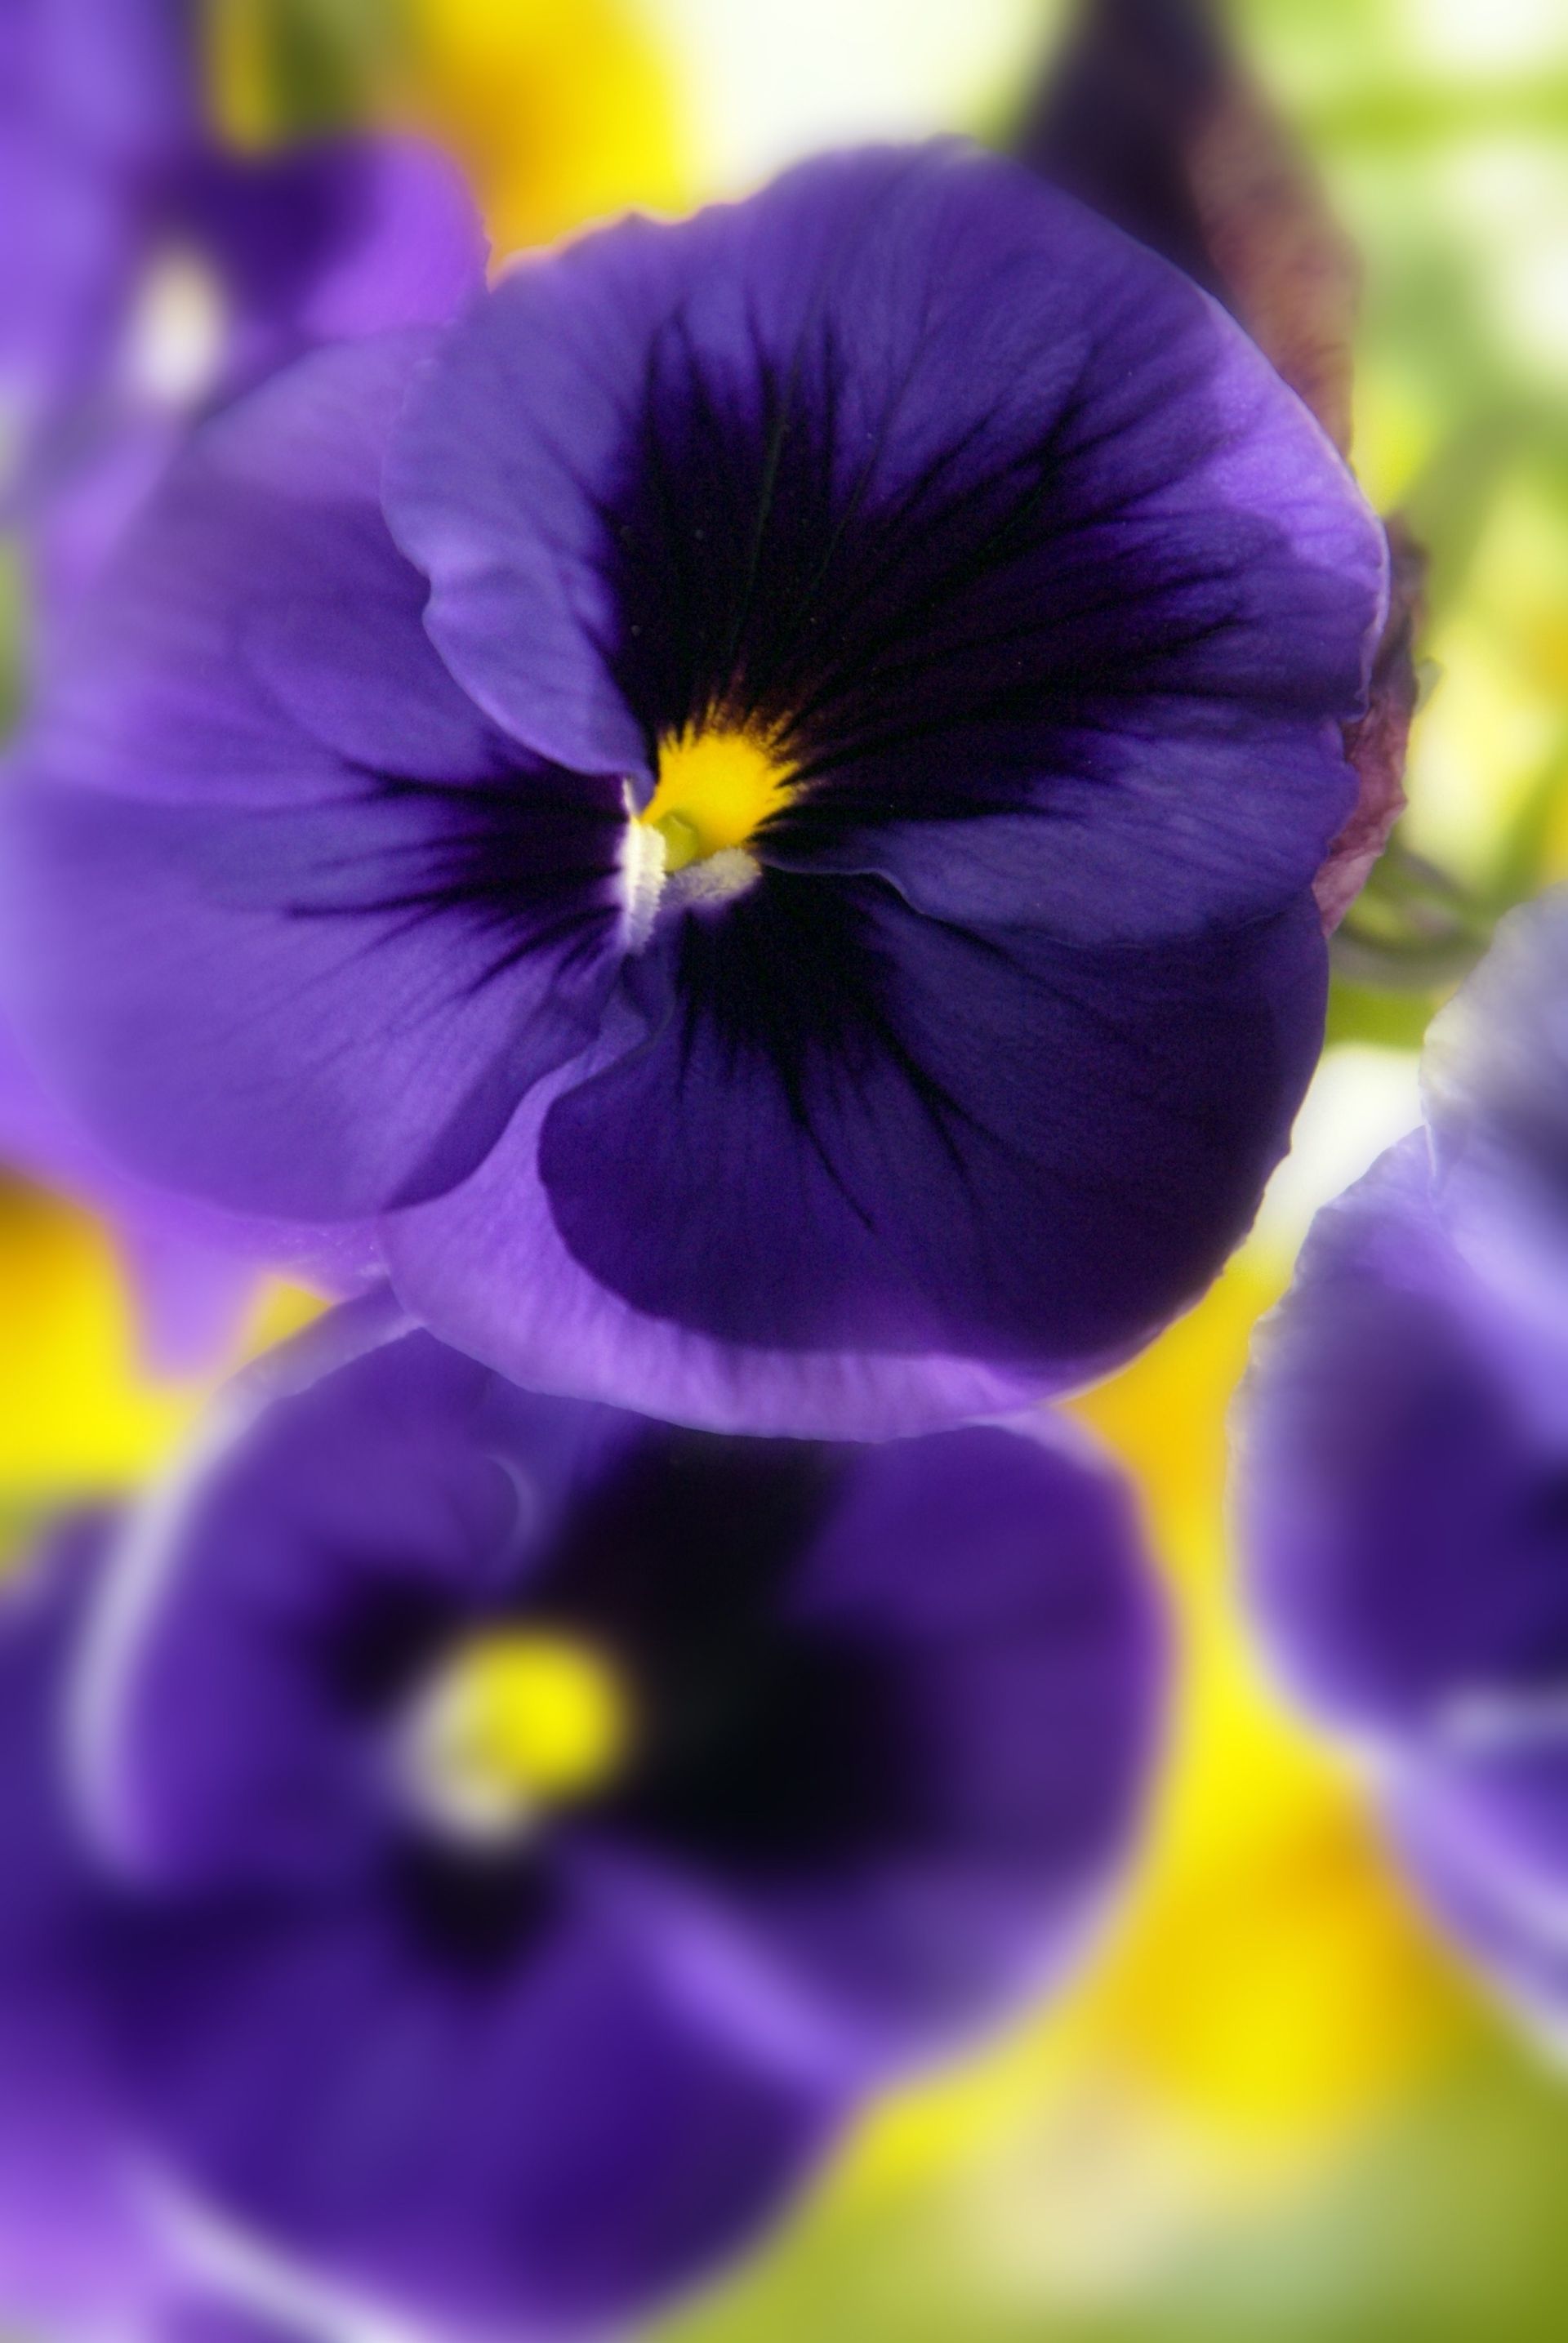 Purple pansies with gold centers.